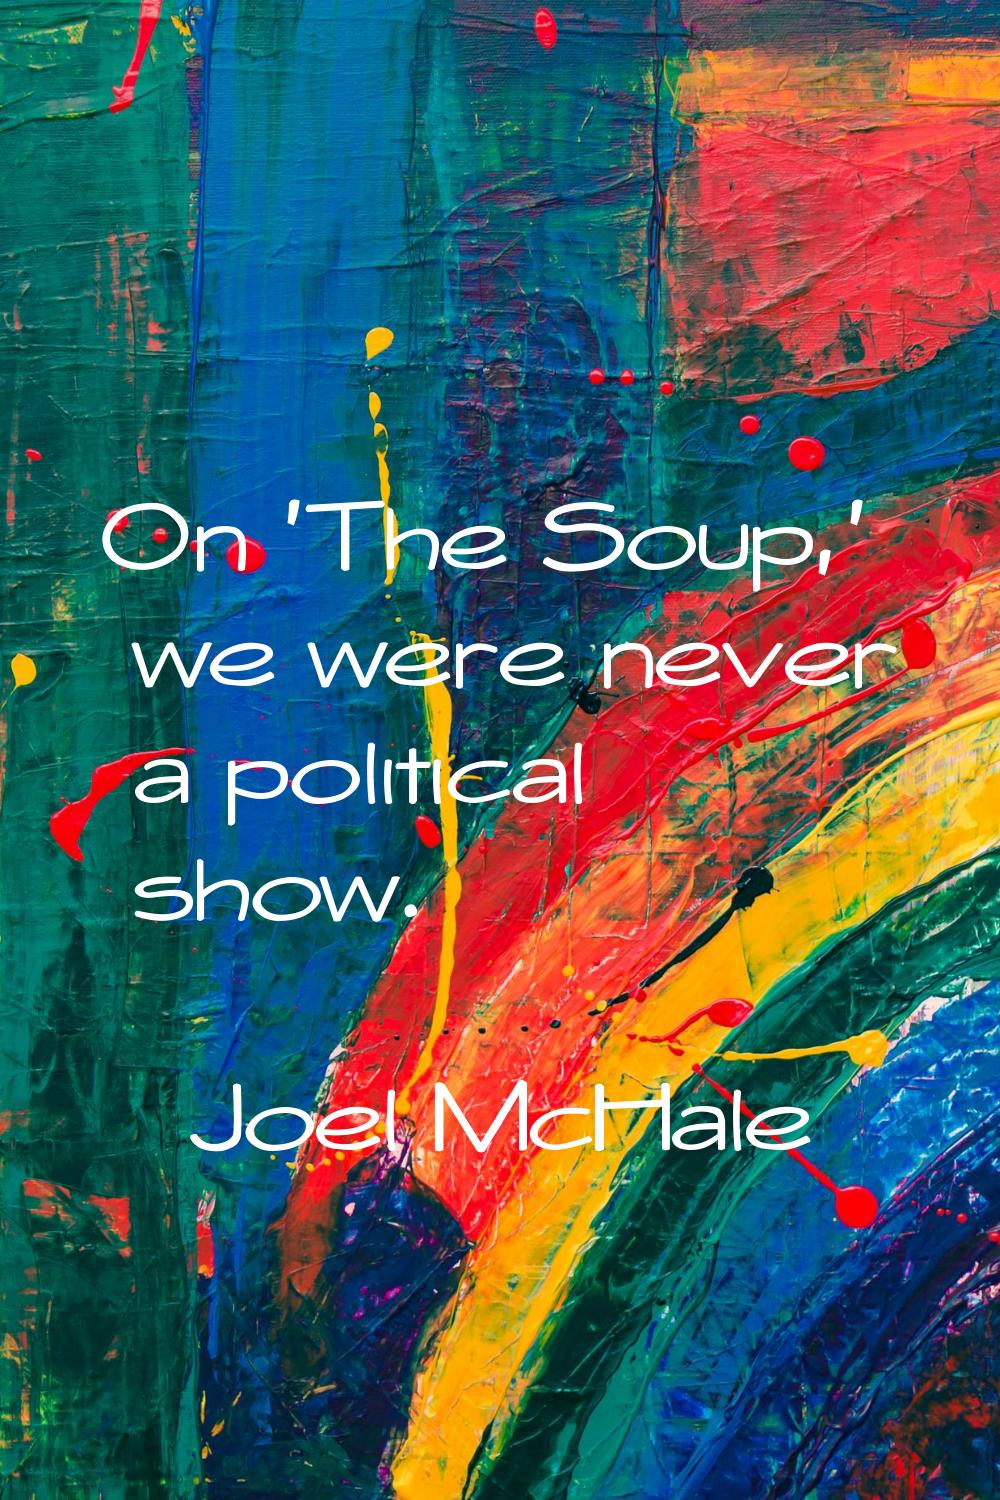 On 'The Soup,' we were never a political show.